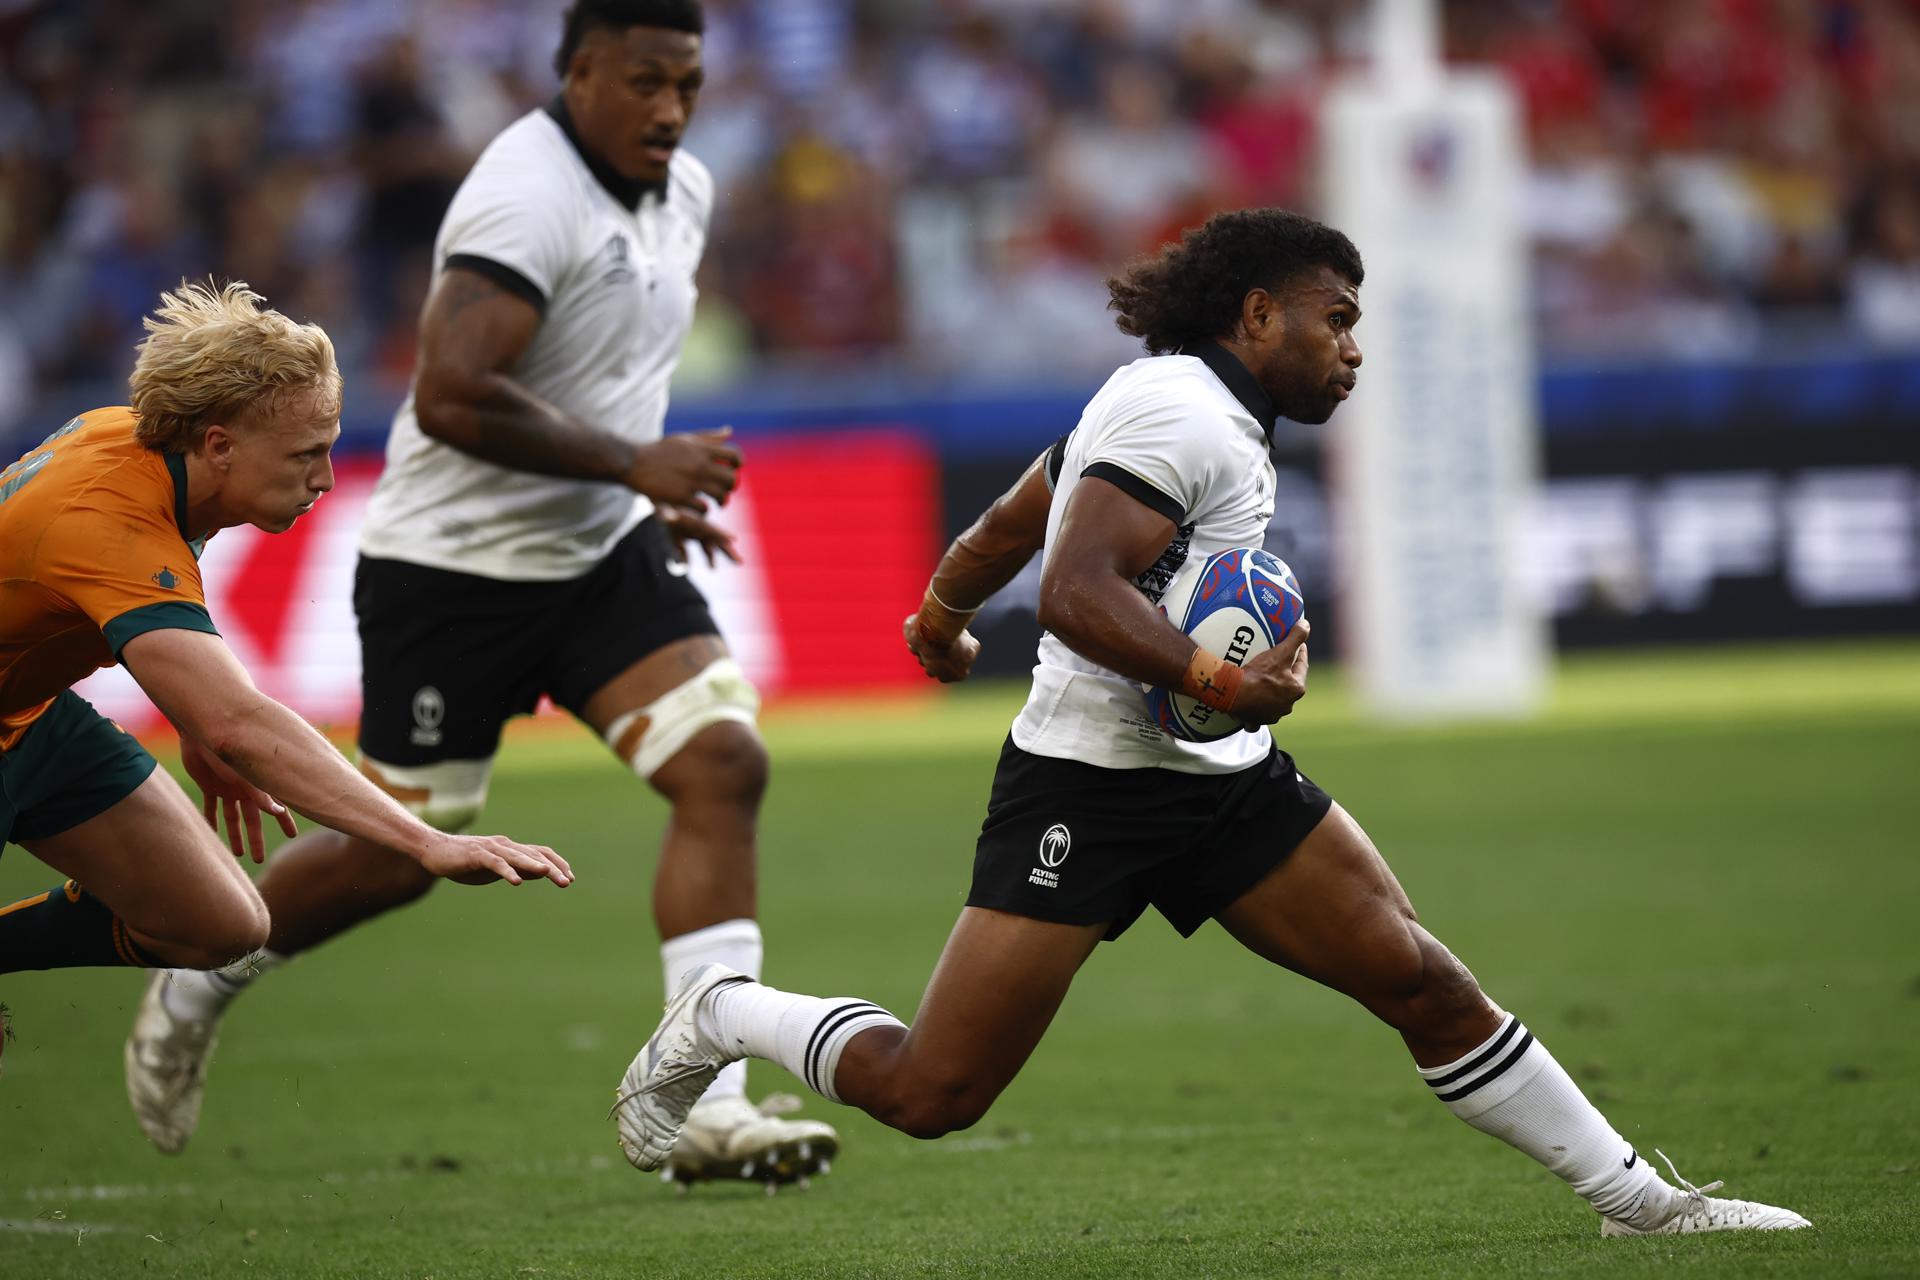 Australia's Carter Gordon (L) and tFiji's Simione Kuruvoli (R) in action during the Rugby World Cup Pool C match between Australia and Fiji in Saint-Etienne, France, 17 September 2023. EFE-EPA/YOAN VALAT
